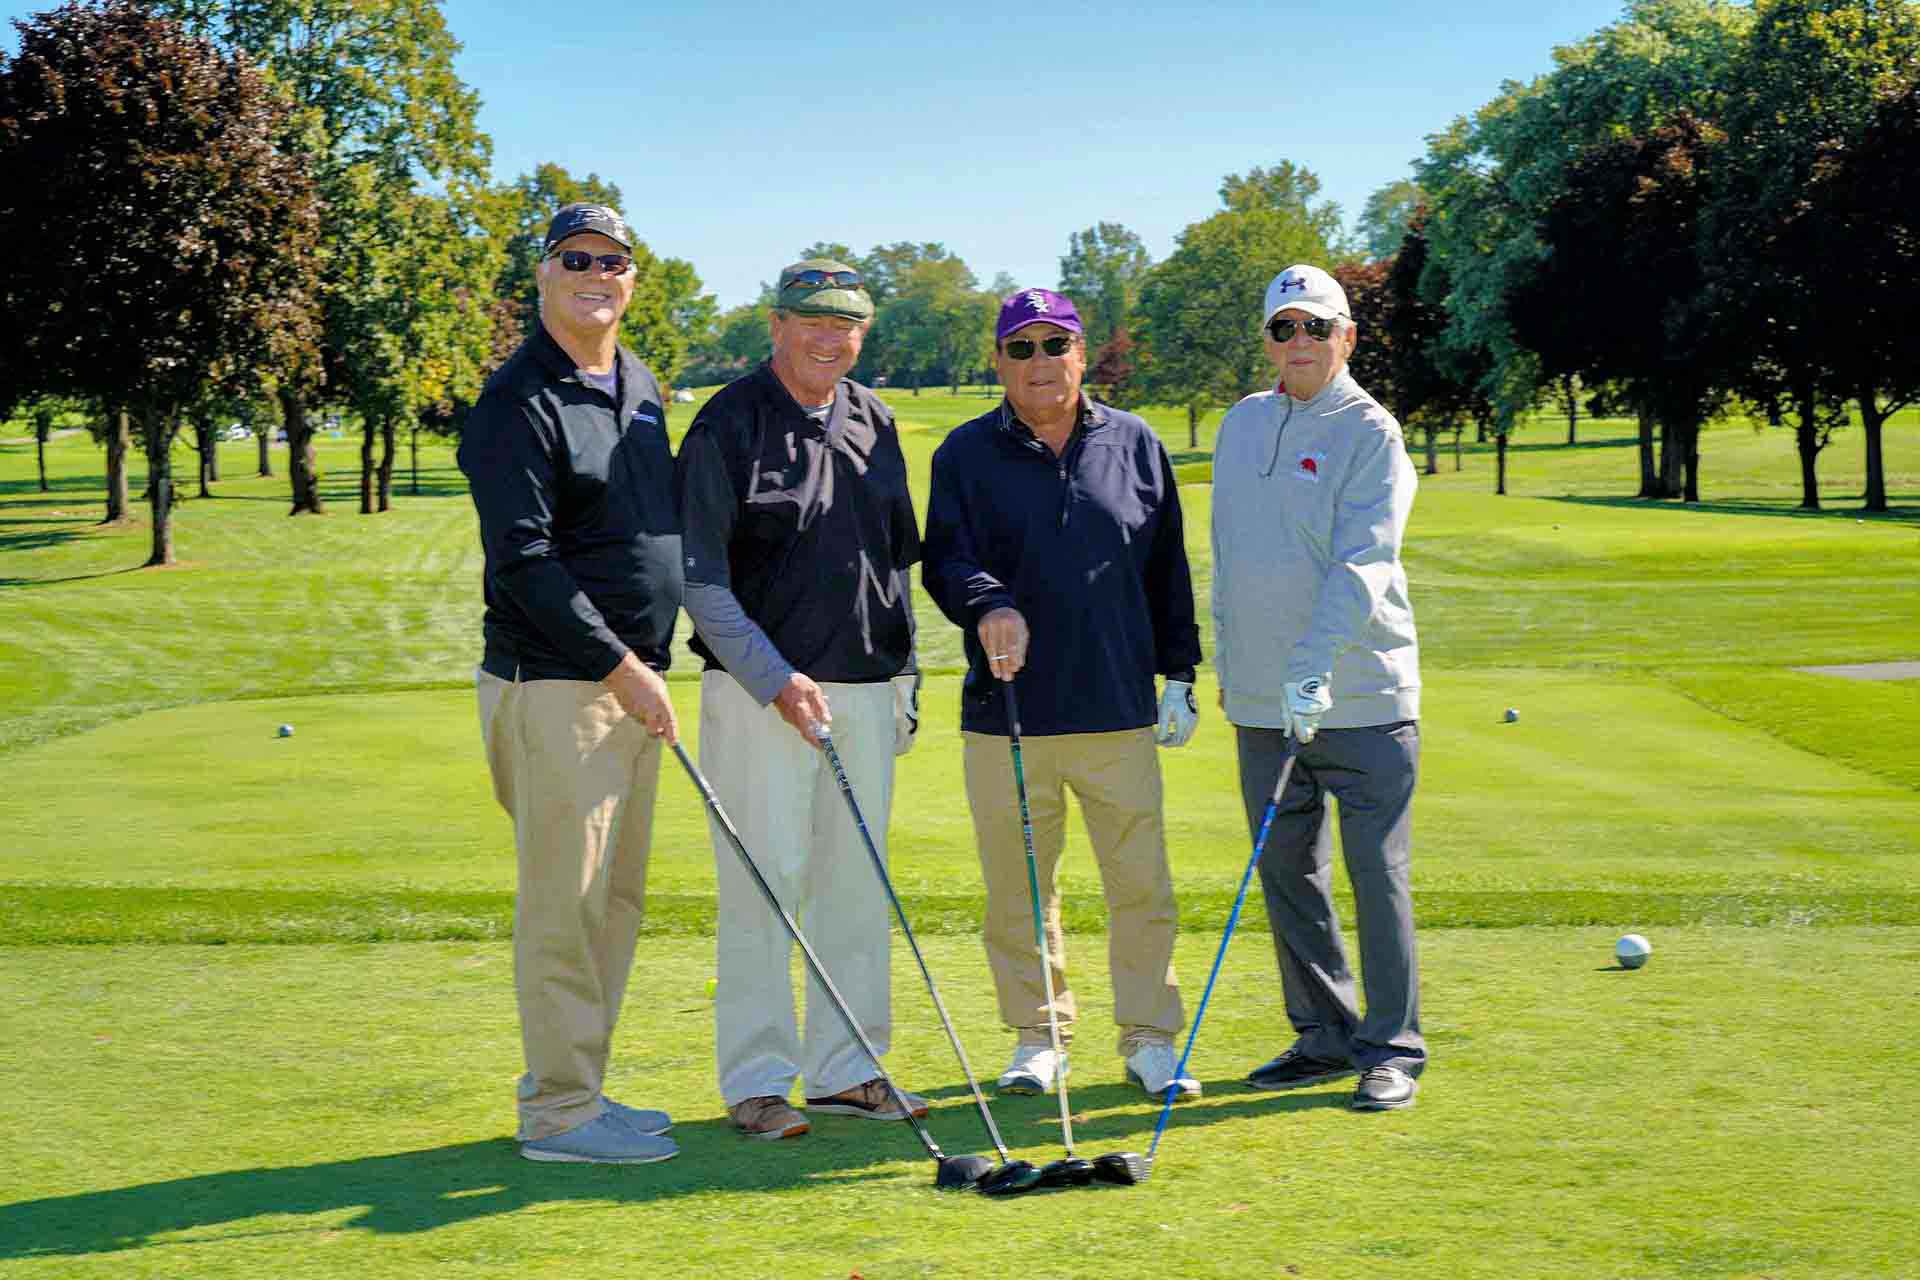 2020-endownment-classic-four-golfers-hold-clubs-at-event